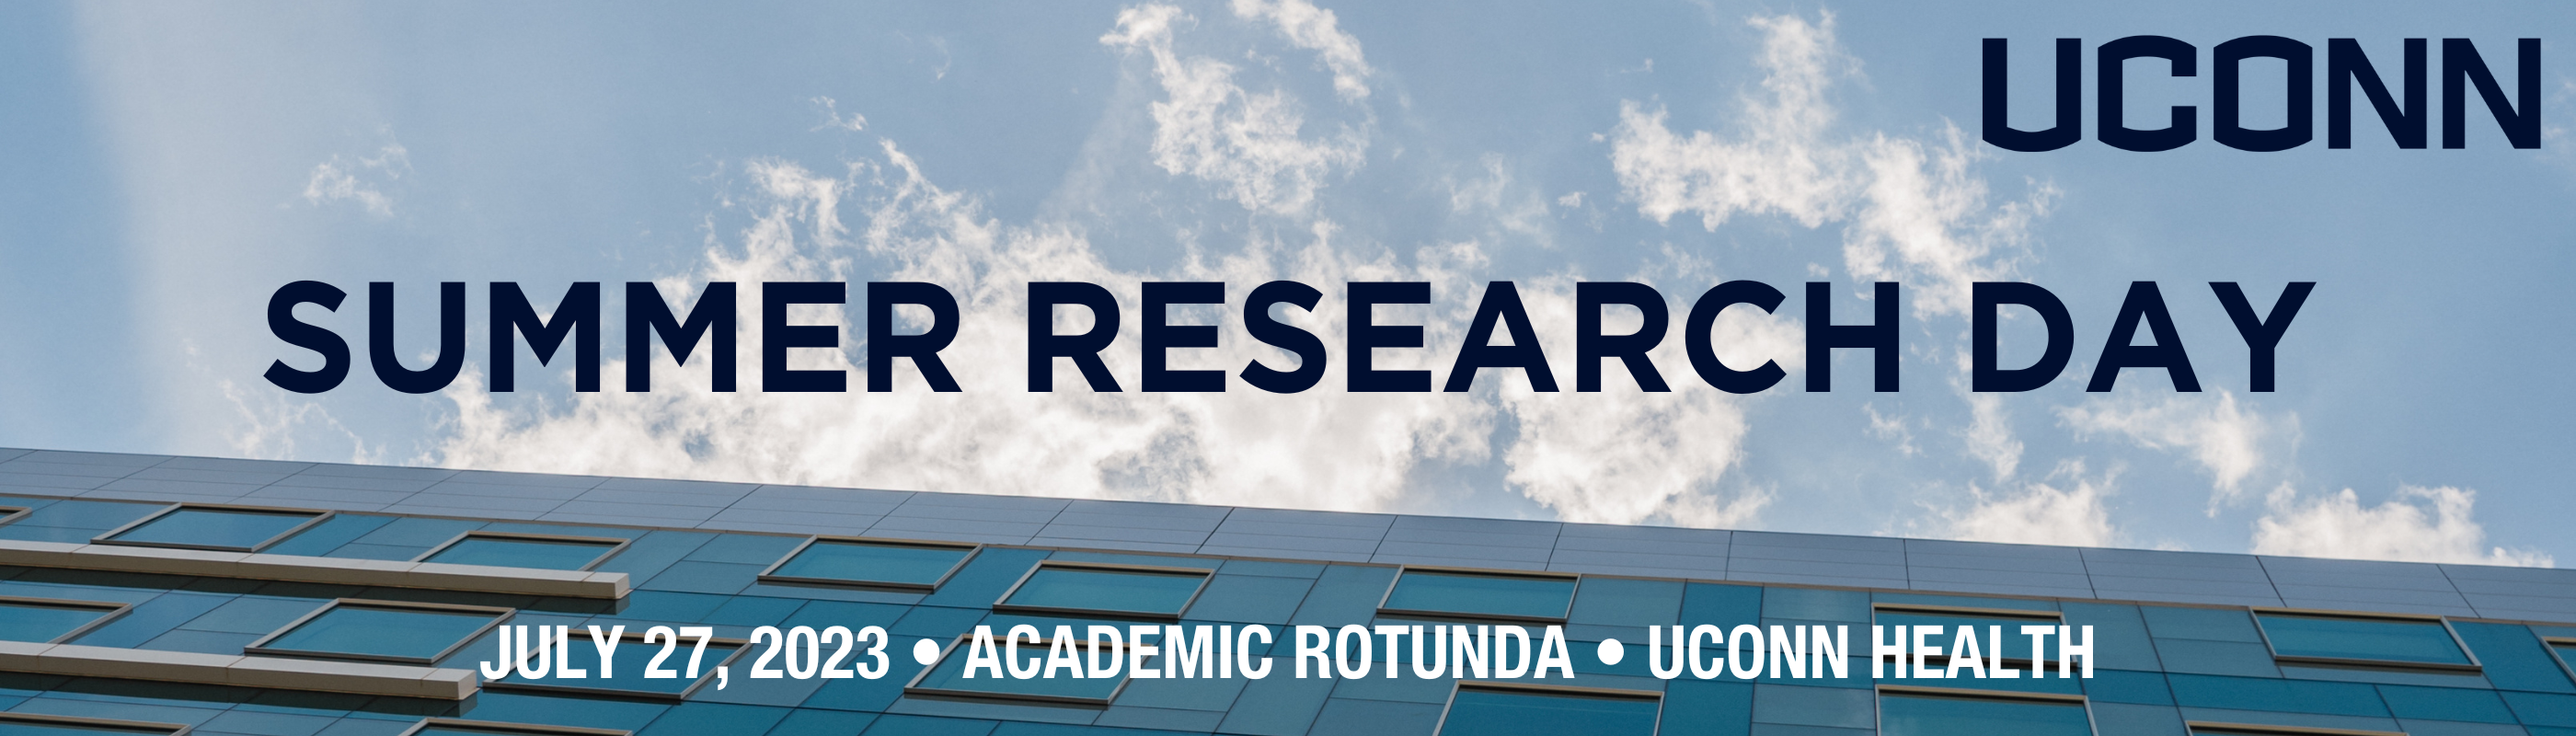 A blue sky with patchy clouds can be seen above the UConn Health facade. Over the image, text reads, "Summer Research Day. July 29, 2022 - Academic Rotunda - UConn Health."